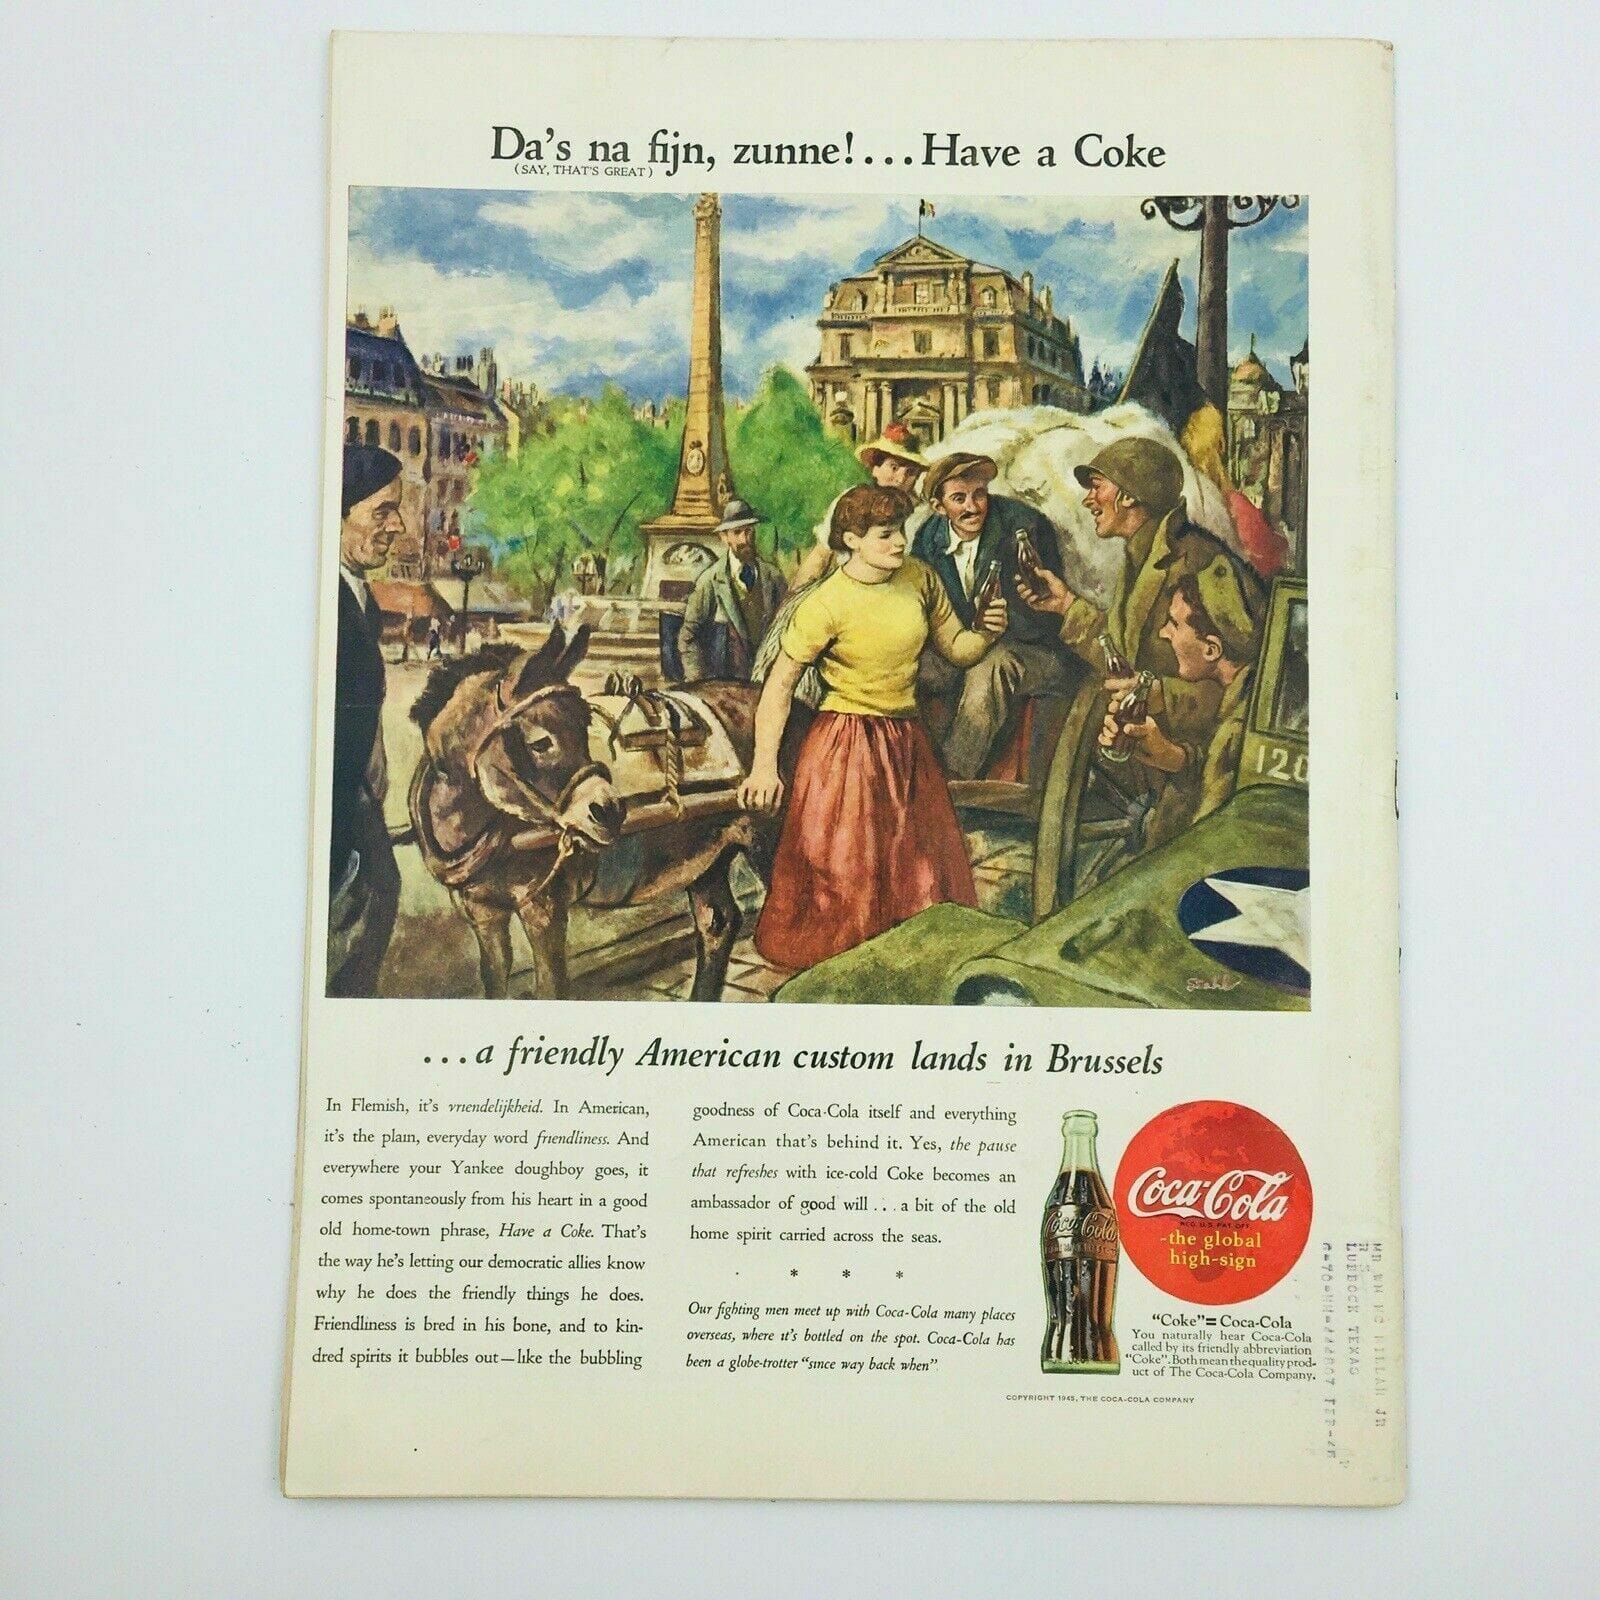 “To The American People” Issue Vintage Life Magazine June 4, 1945 - parsimonyshoppes